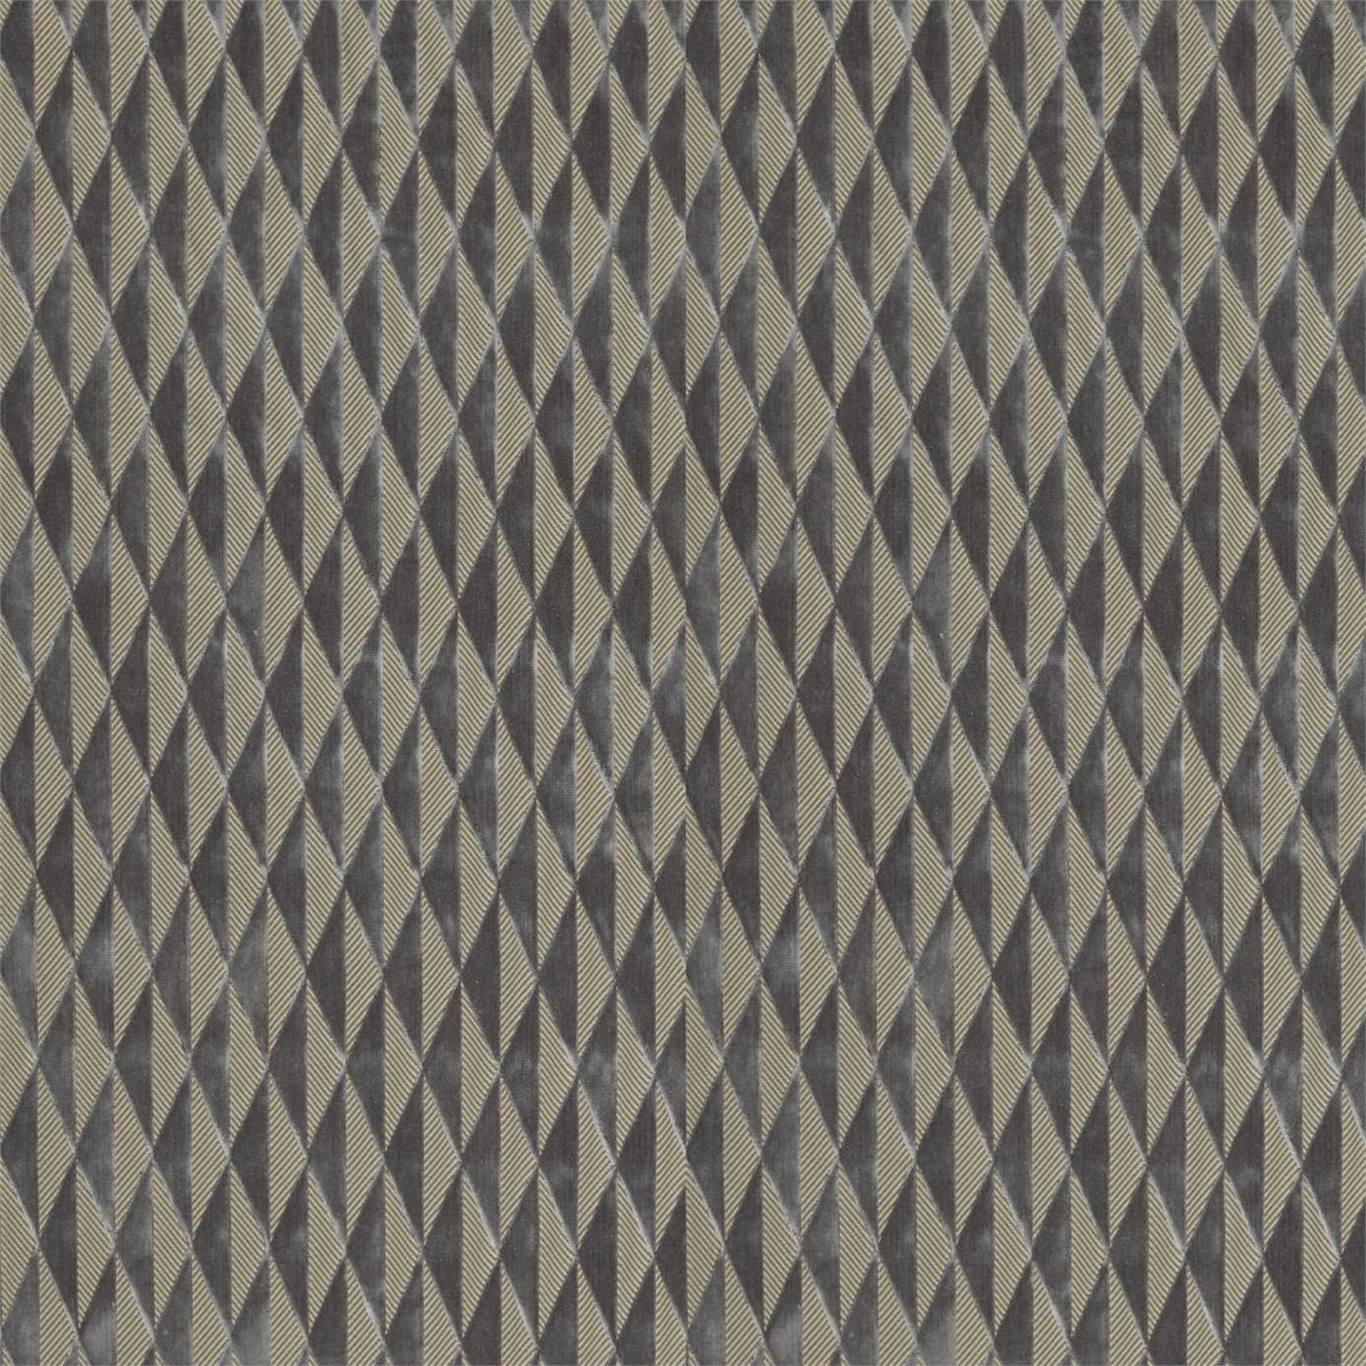 Irradiant Pewter Fabric by HAR